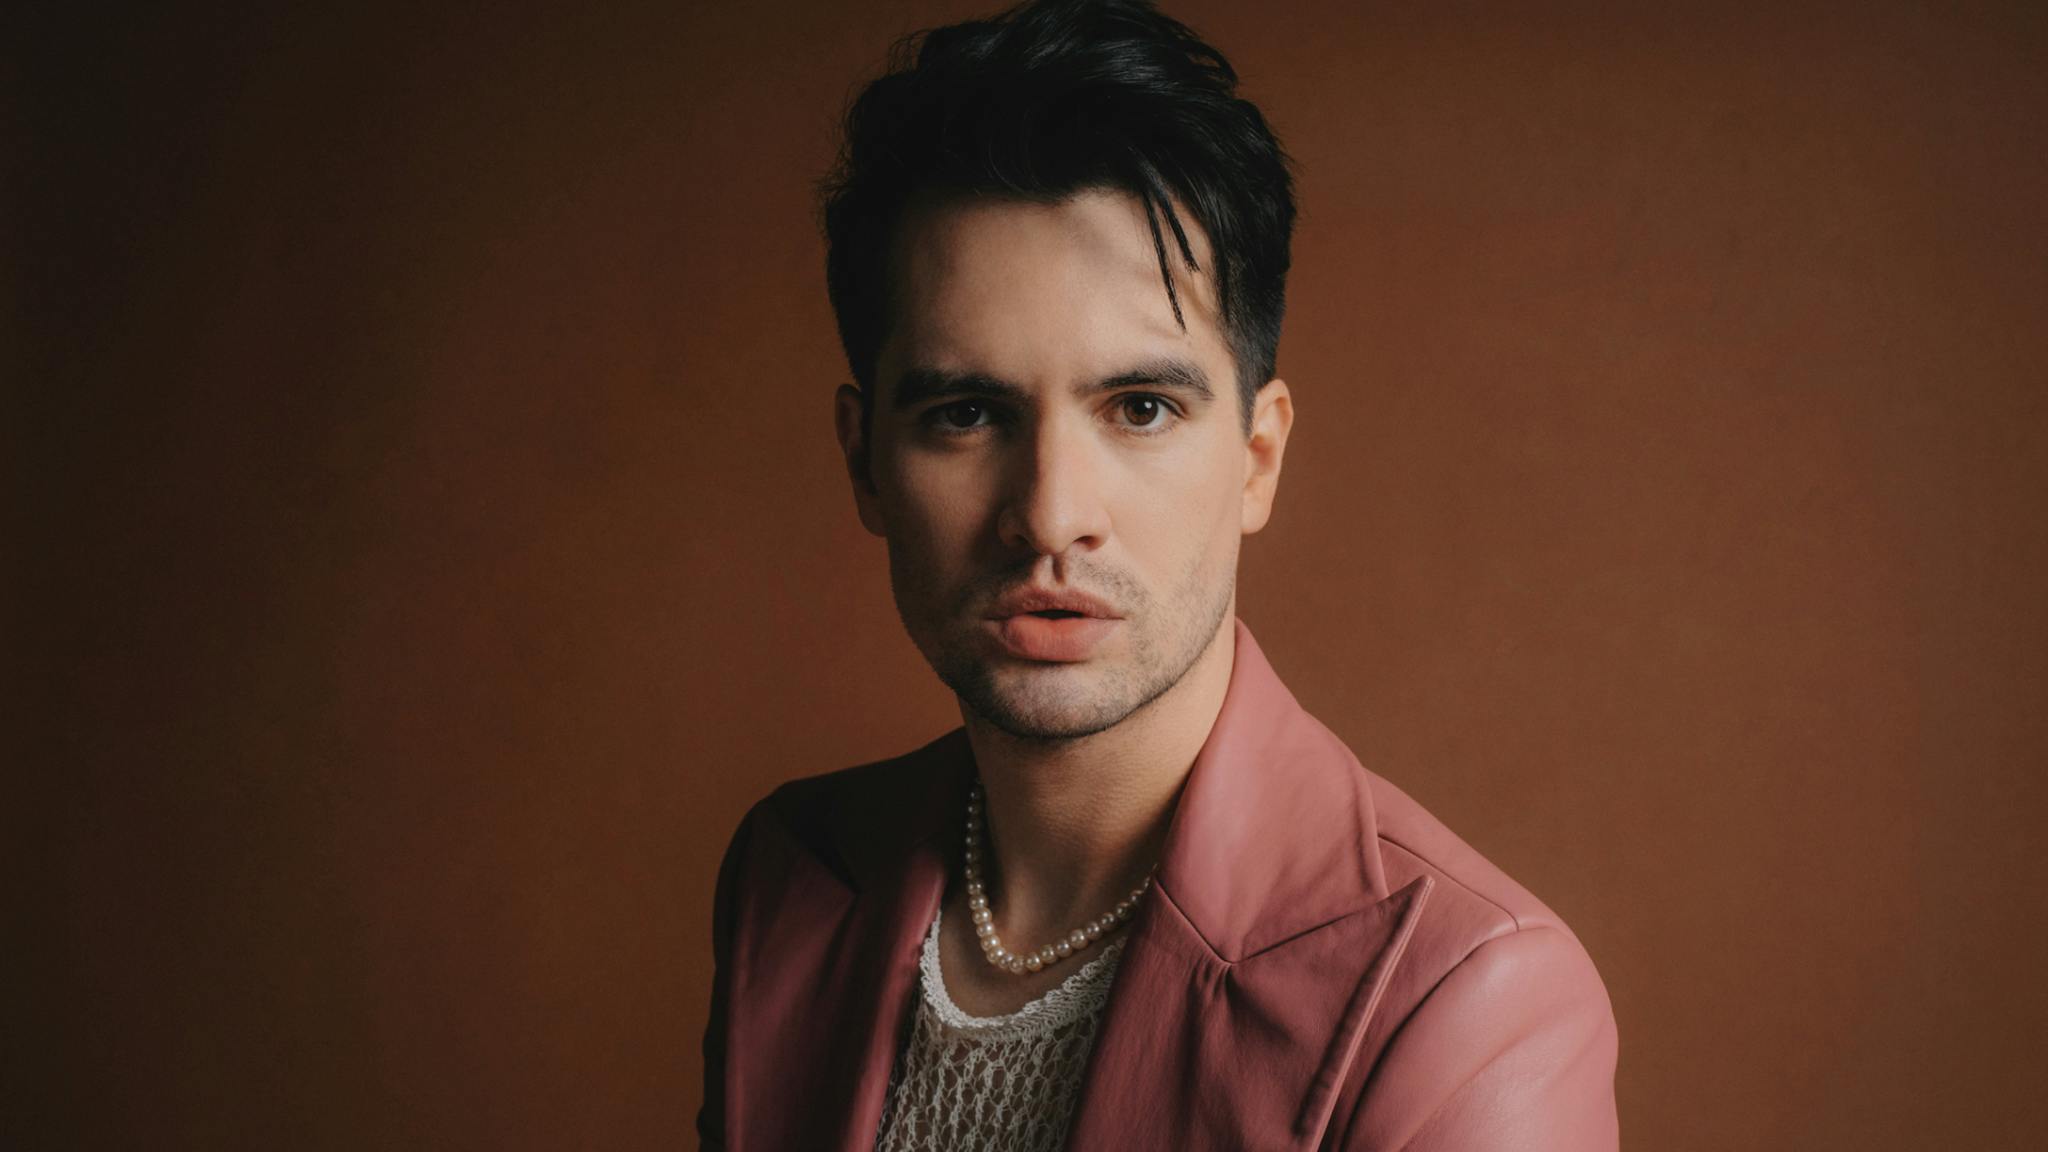 Brendon Urie disbands Panic! At The Disco